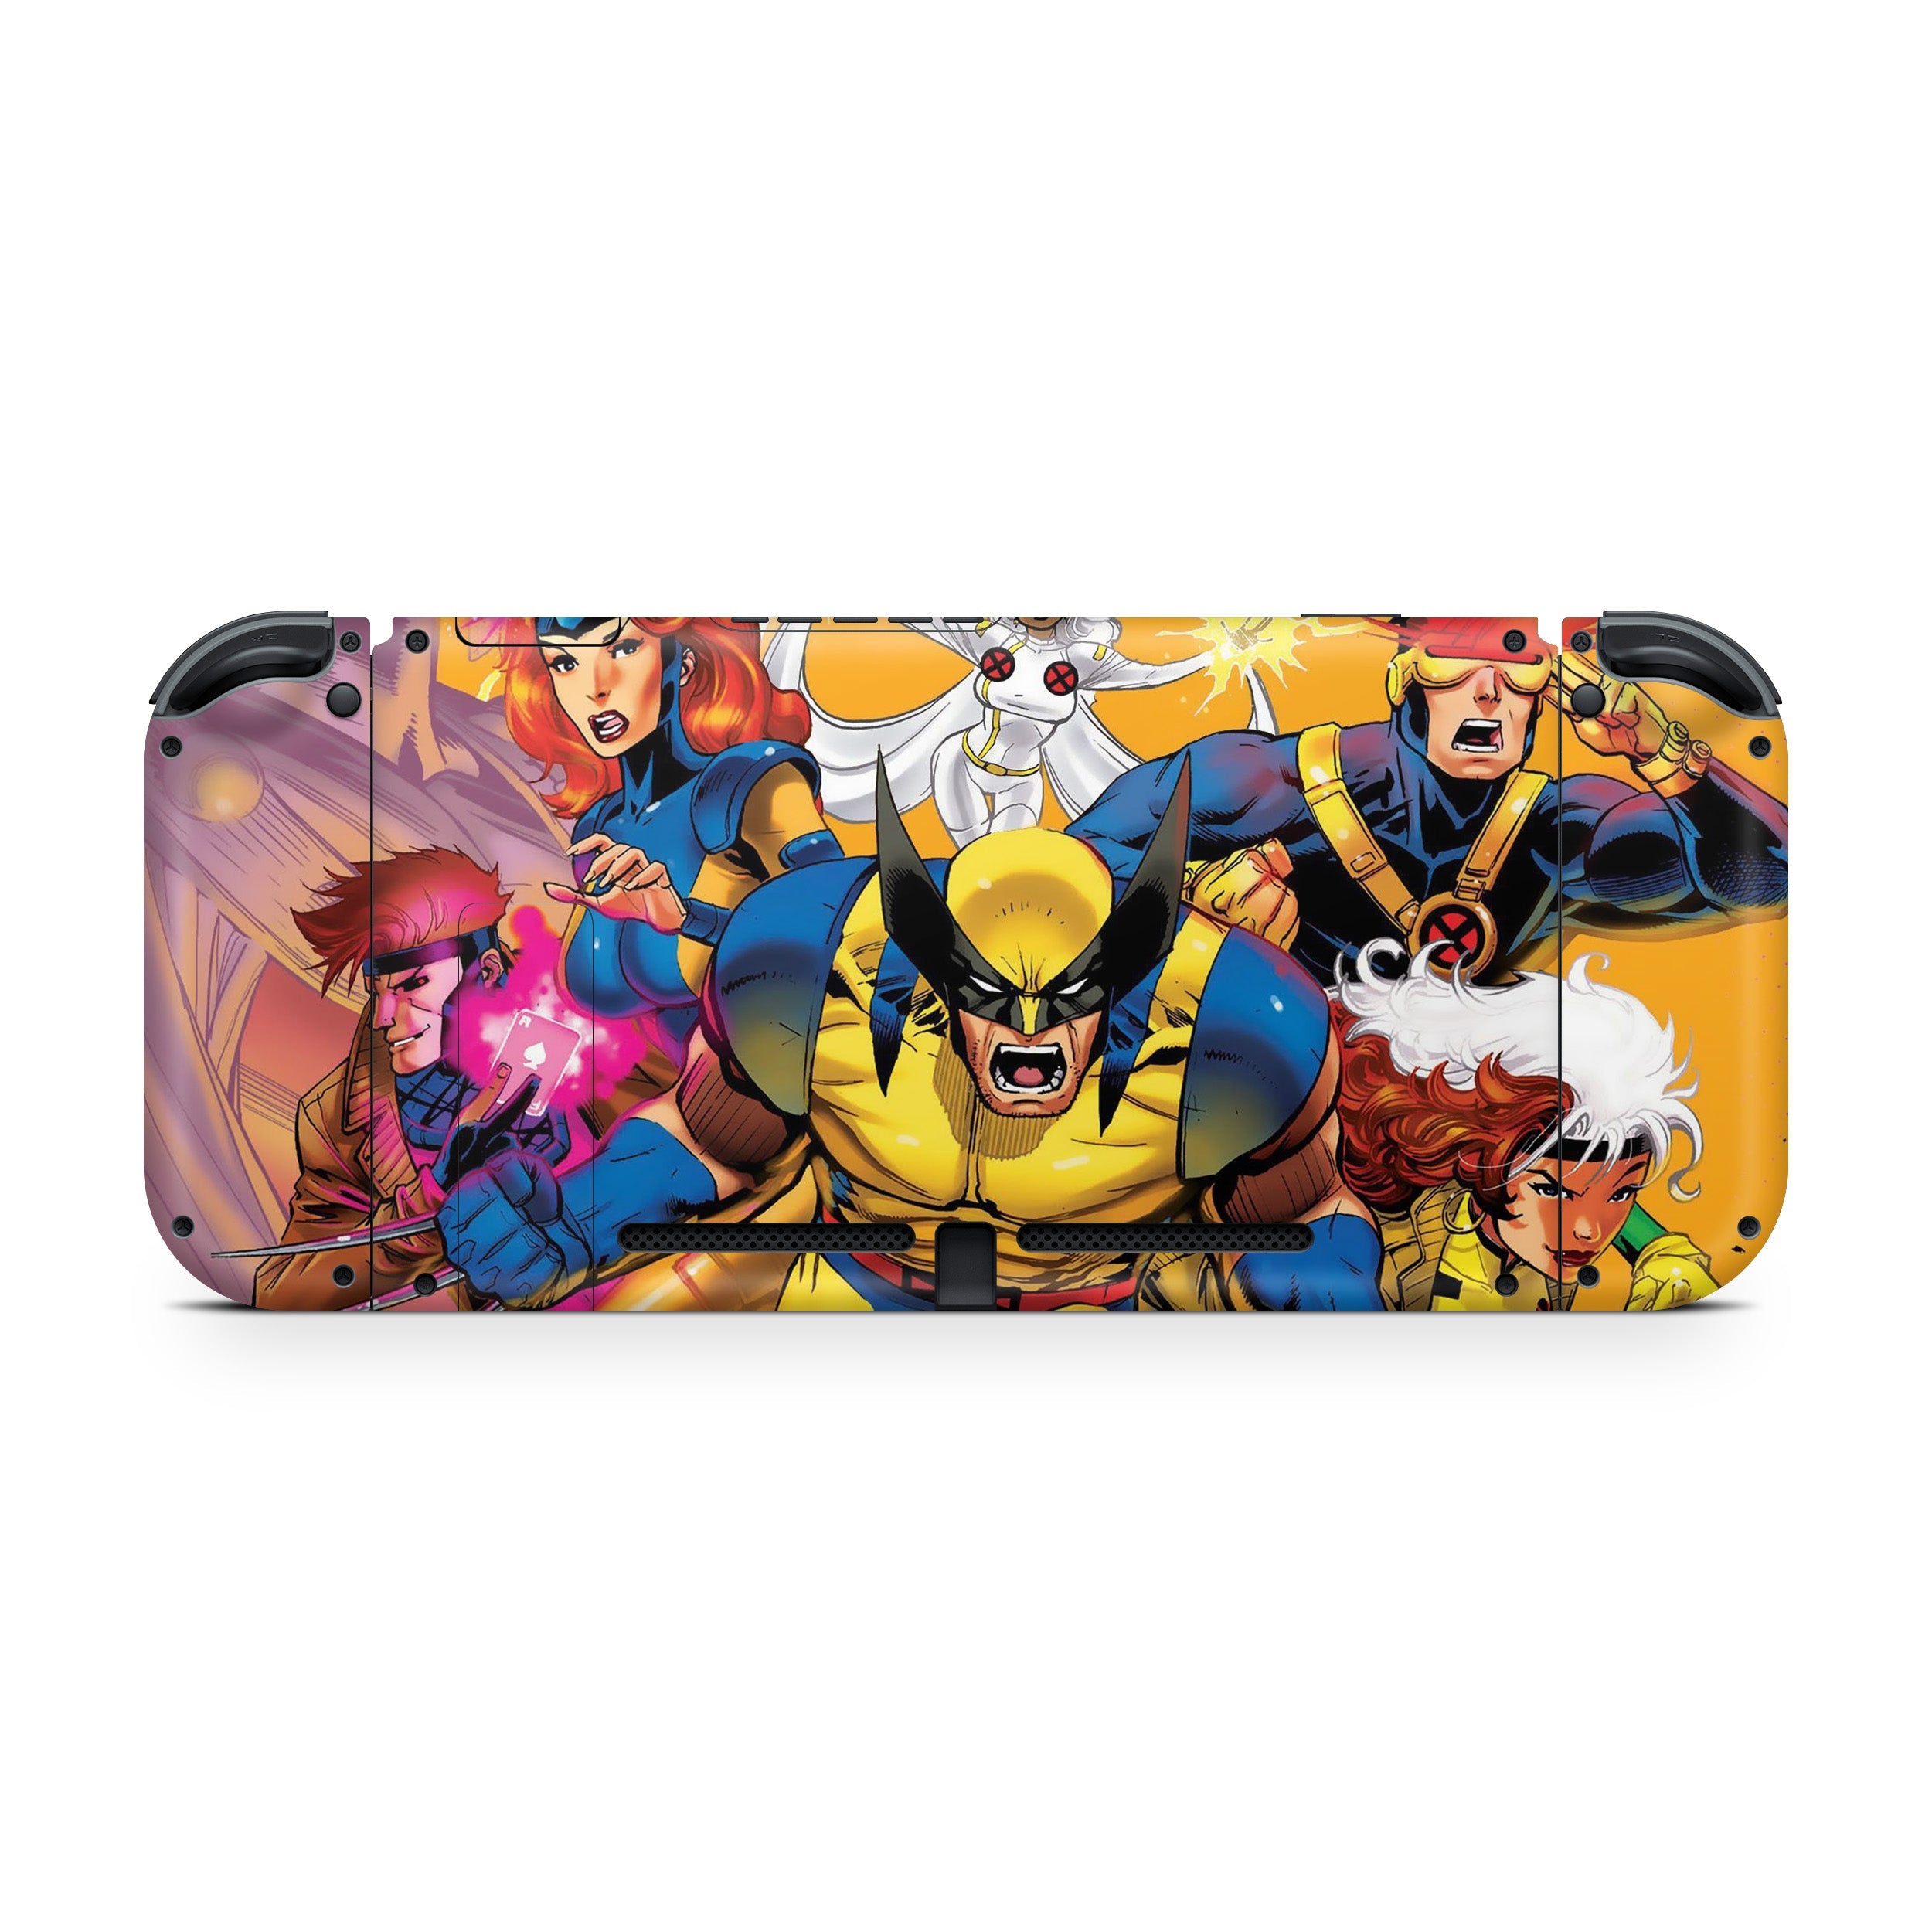 A video game skin featuring a Marvel X Men design for the Nintendo Switch.